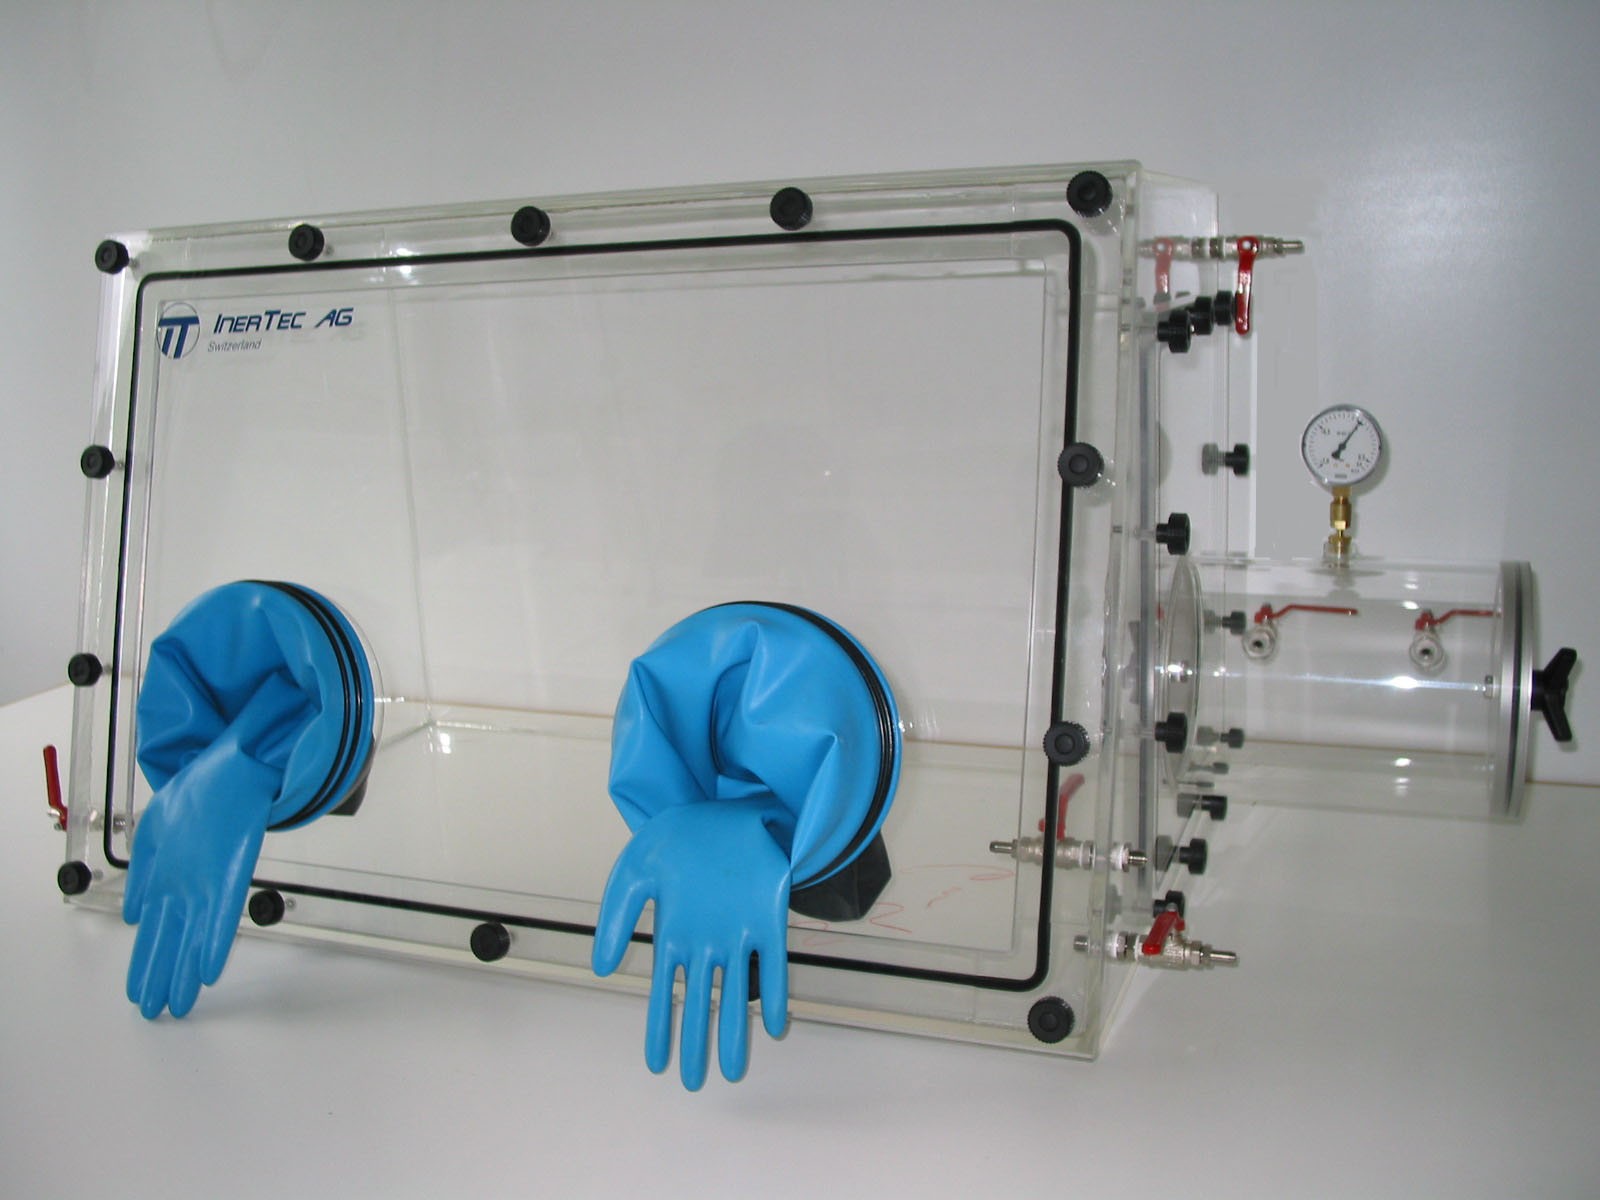 Glovebox made of acrylic&gt; Gas filling: automatic flushing with pressure control, front design: removable, side design: hinged doors, control: humidity controller with data logger